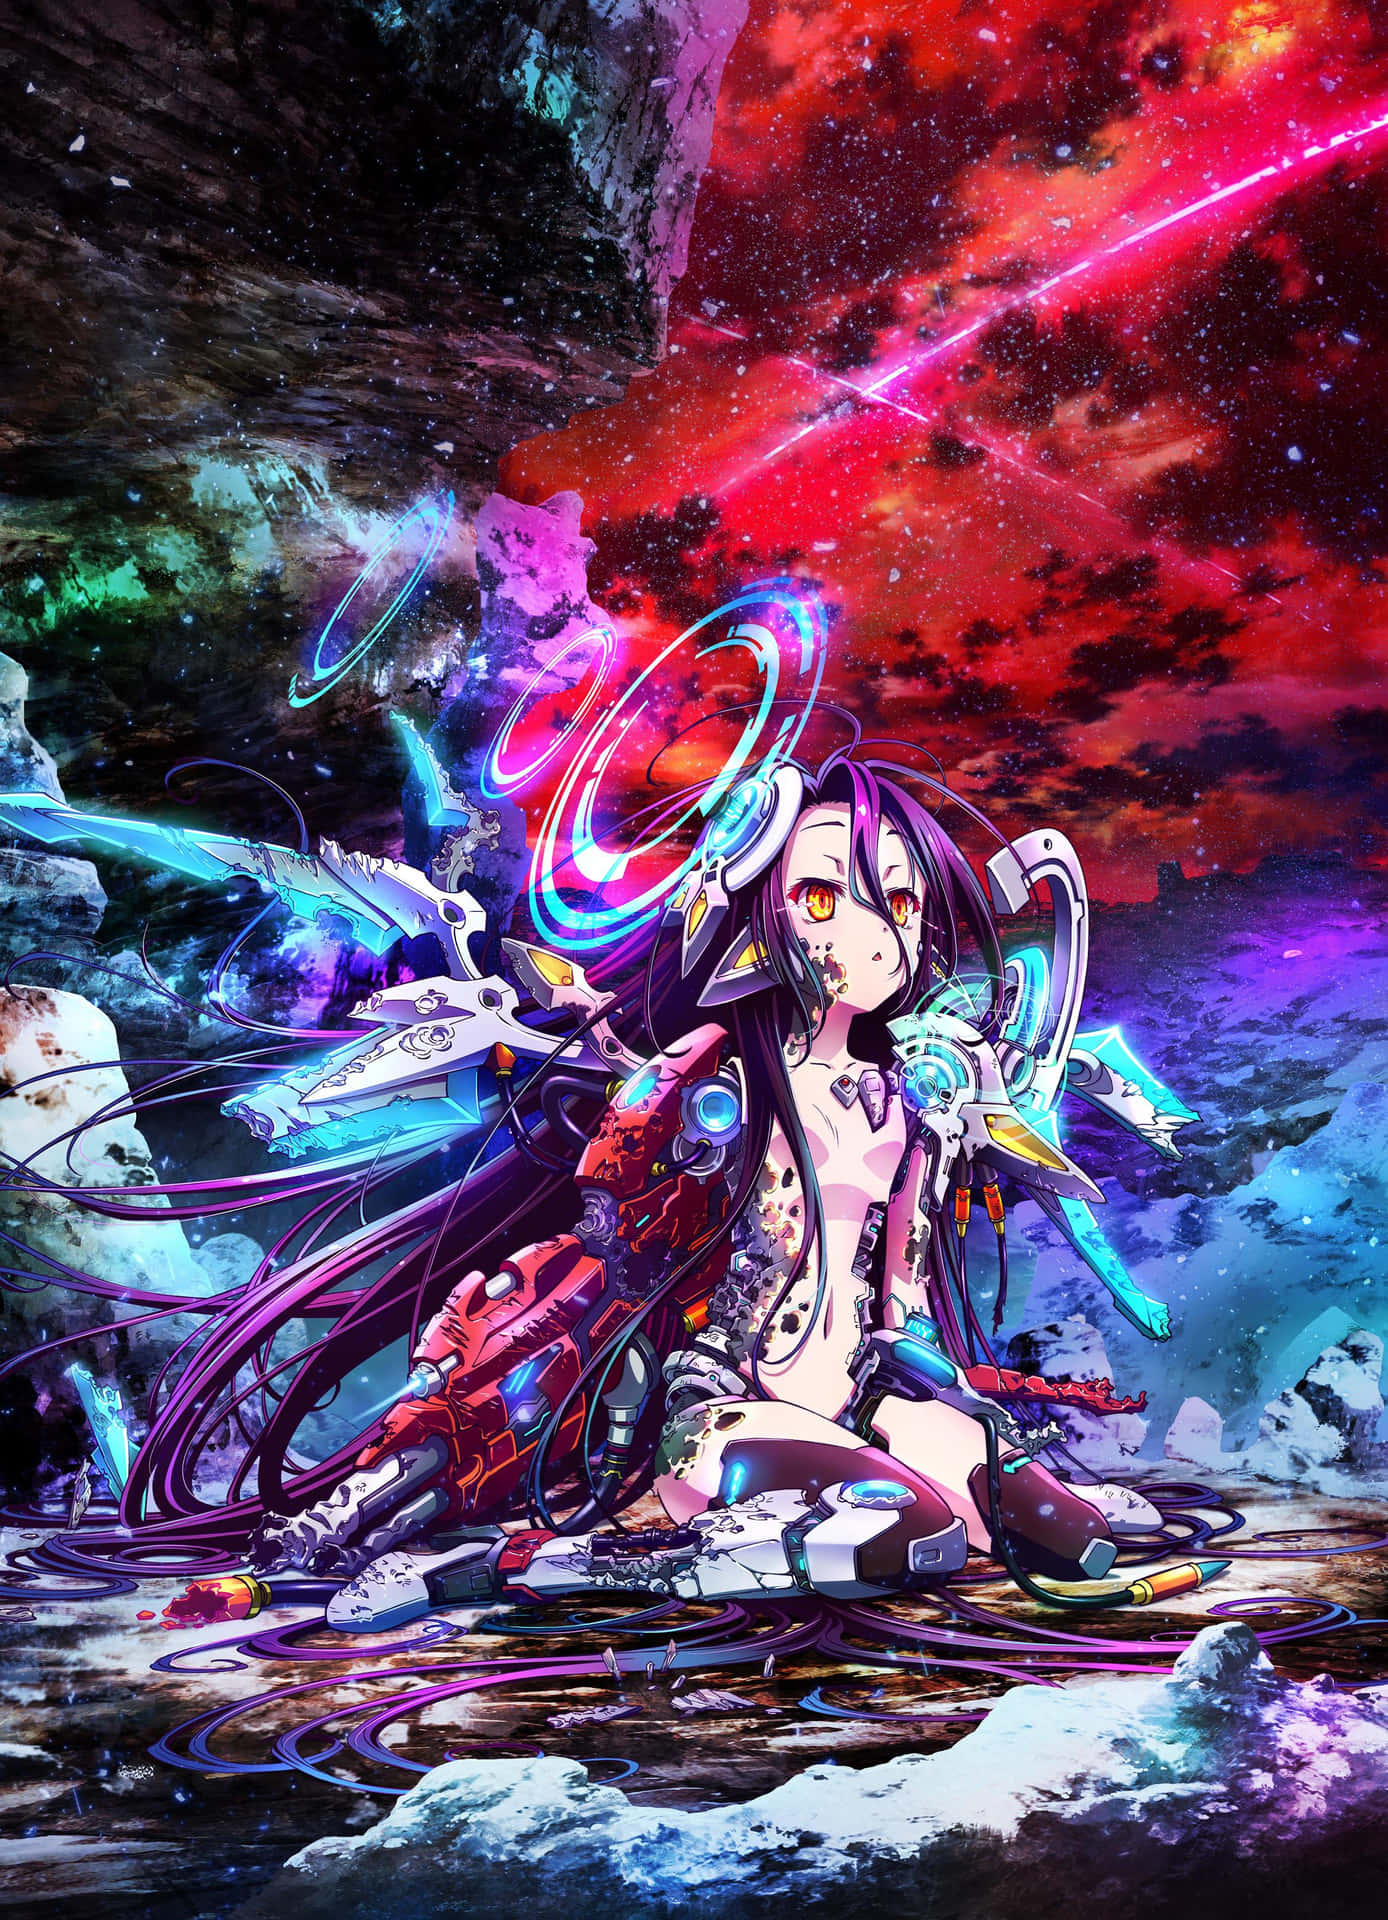 This beautiful world of No Game No Life, where anything can happen.